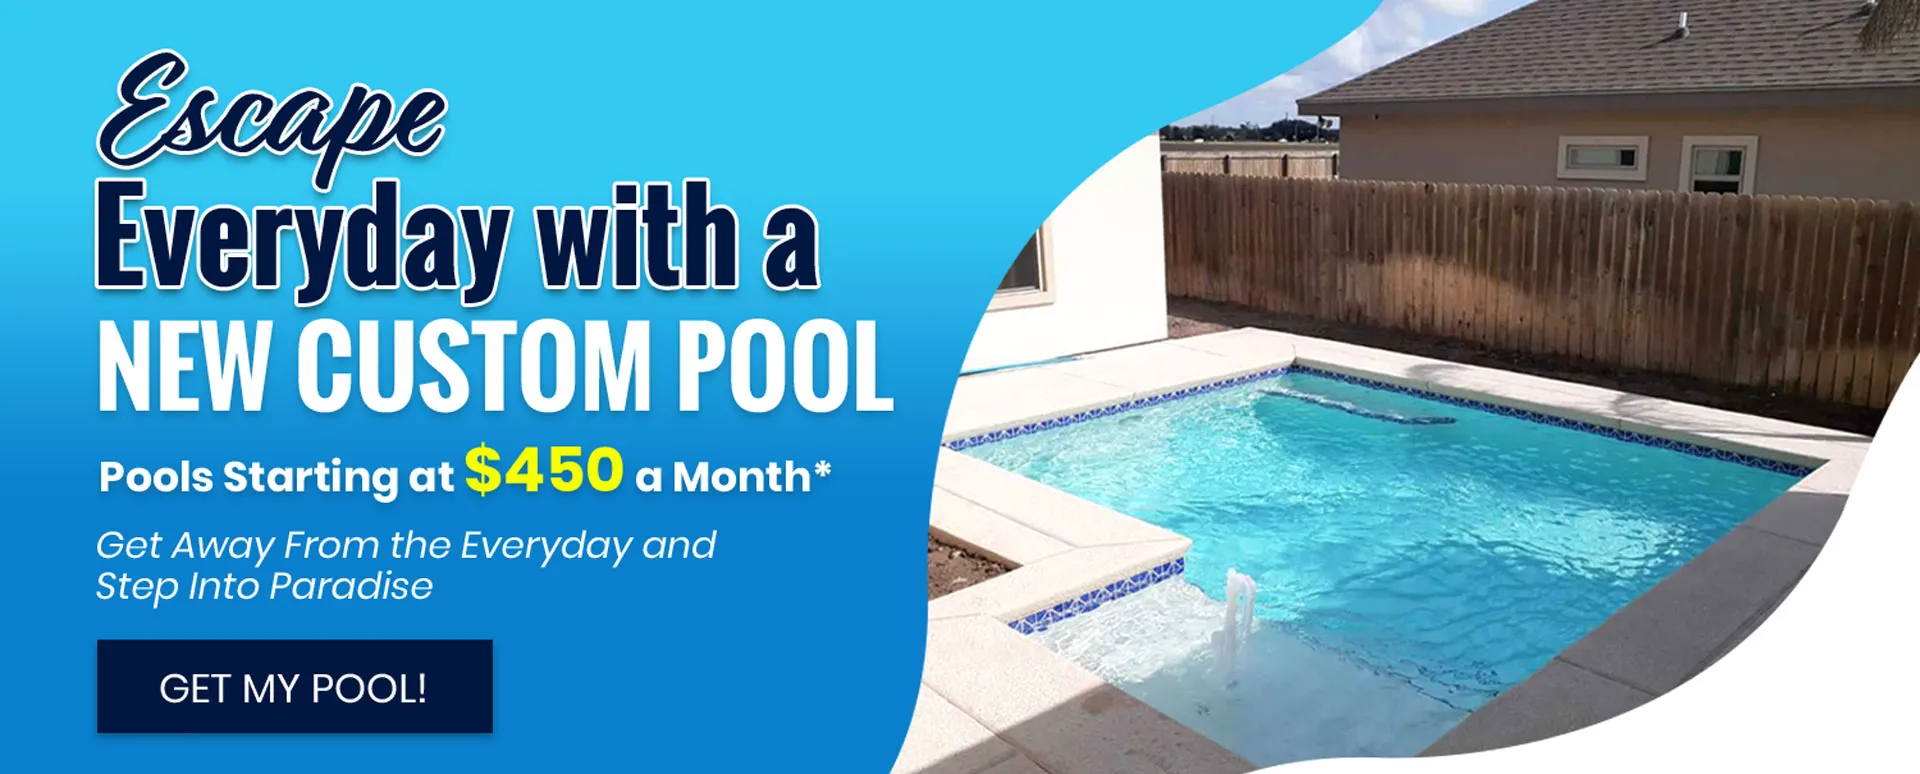 Escape Everyday with a New Custom Pool